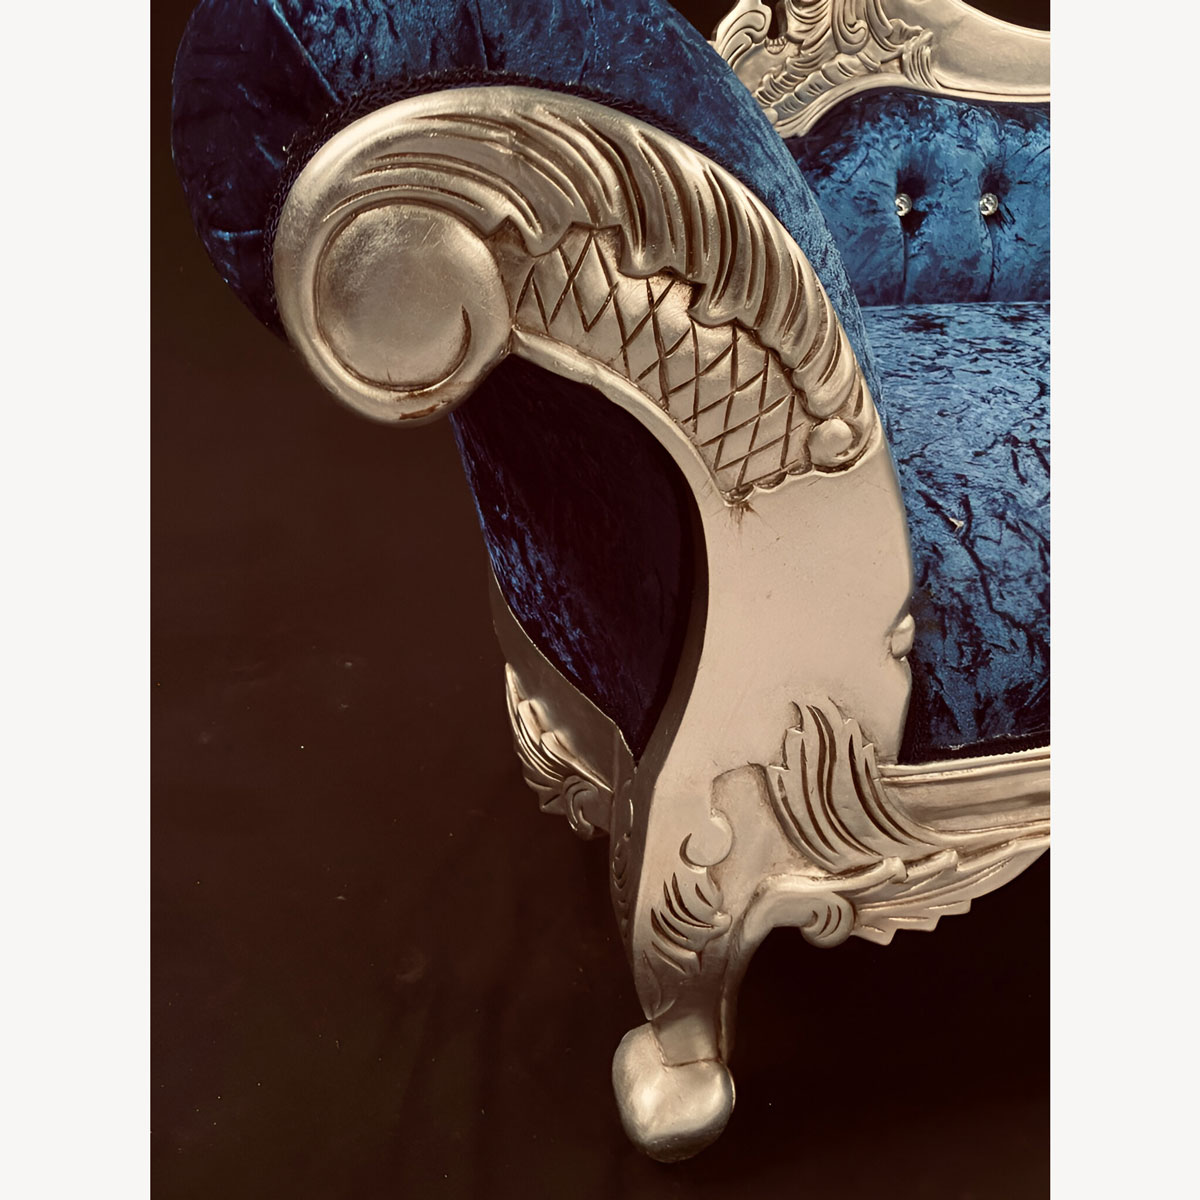 Chaise Hampshire Sofa In Silver Leaf Frame Upholstered In Blue Crushed Velvet With Crystal Buttoning 2 - Hampshire Barn Interiors - Chaise Hampshire Sofa In Silver Leaf Frame Upholstered In Blue Crushed Velvet With Crystal Buttoning -